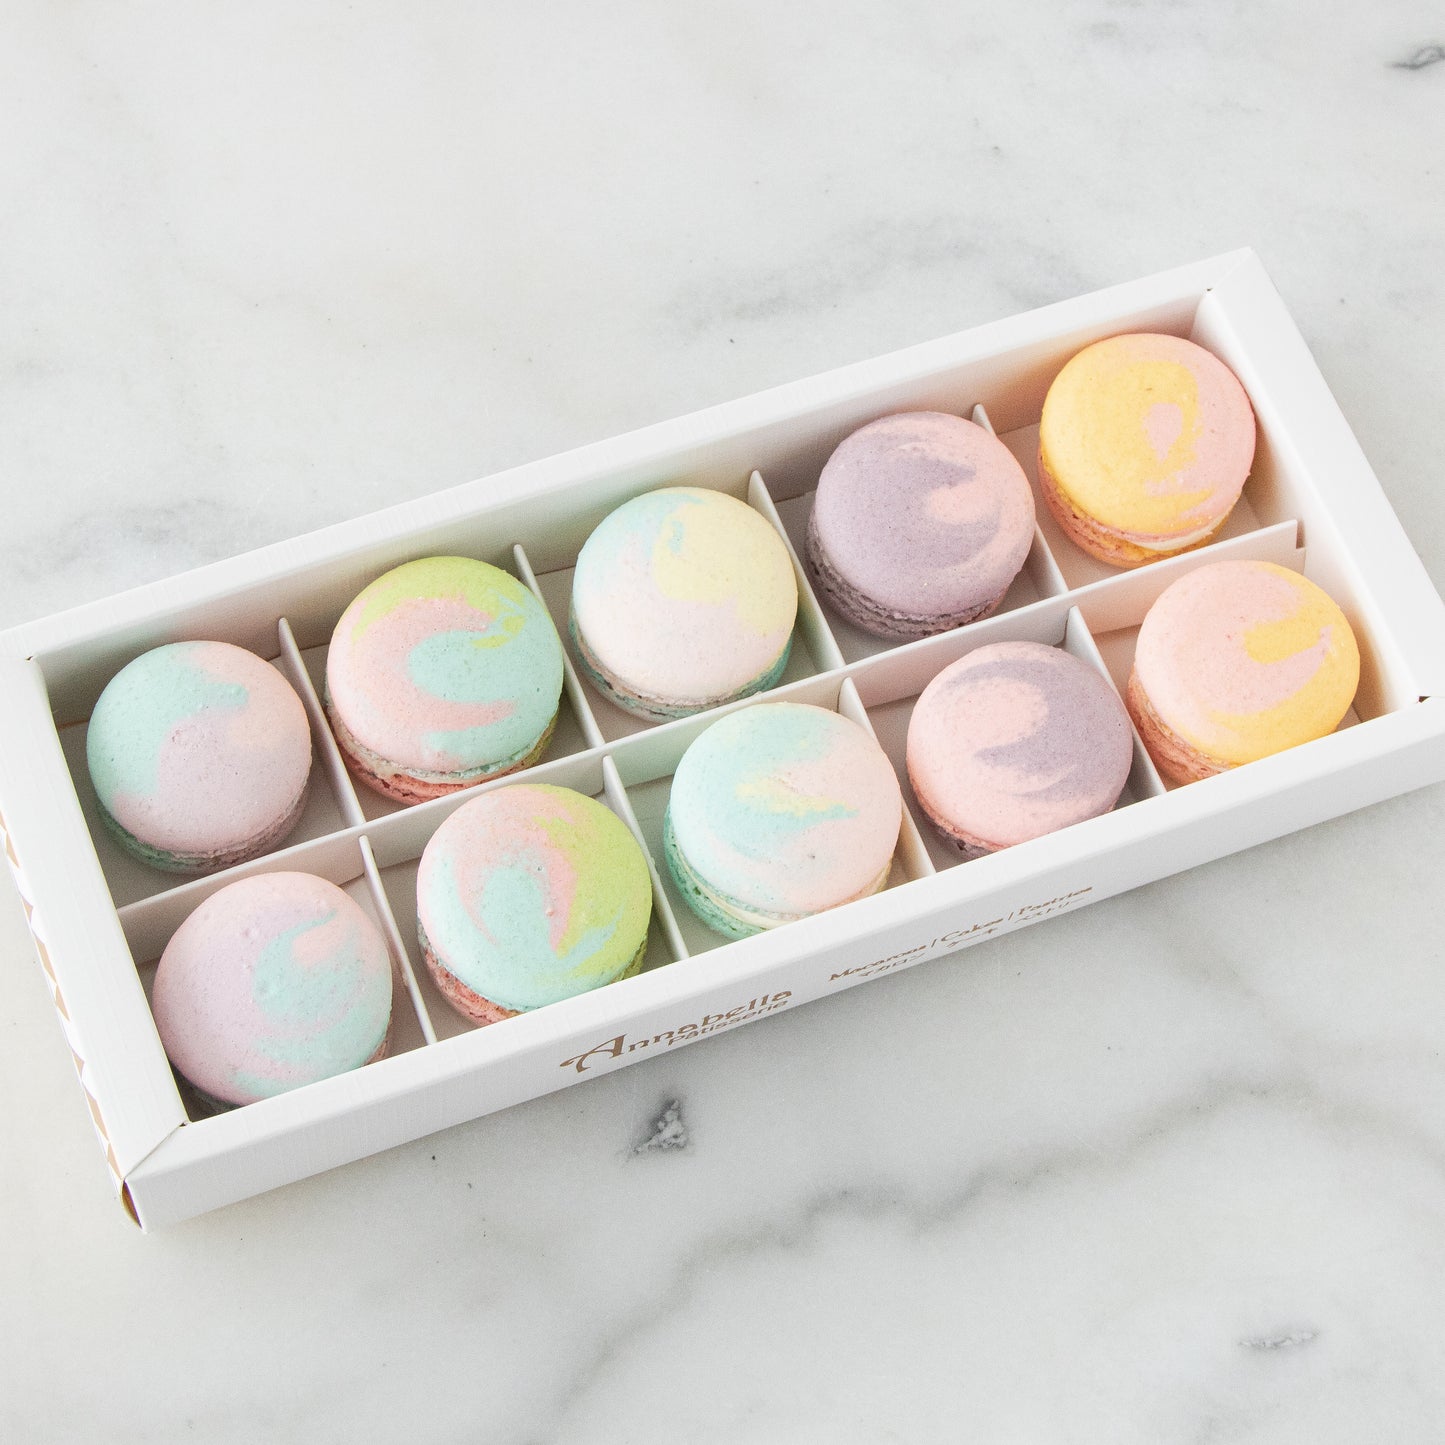 10pcs Marvelous Macarons (Marvelous 1) in Gift Box and Paper Bag | Perfect Gift Choice